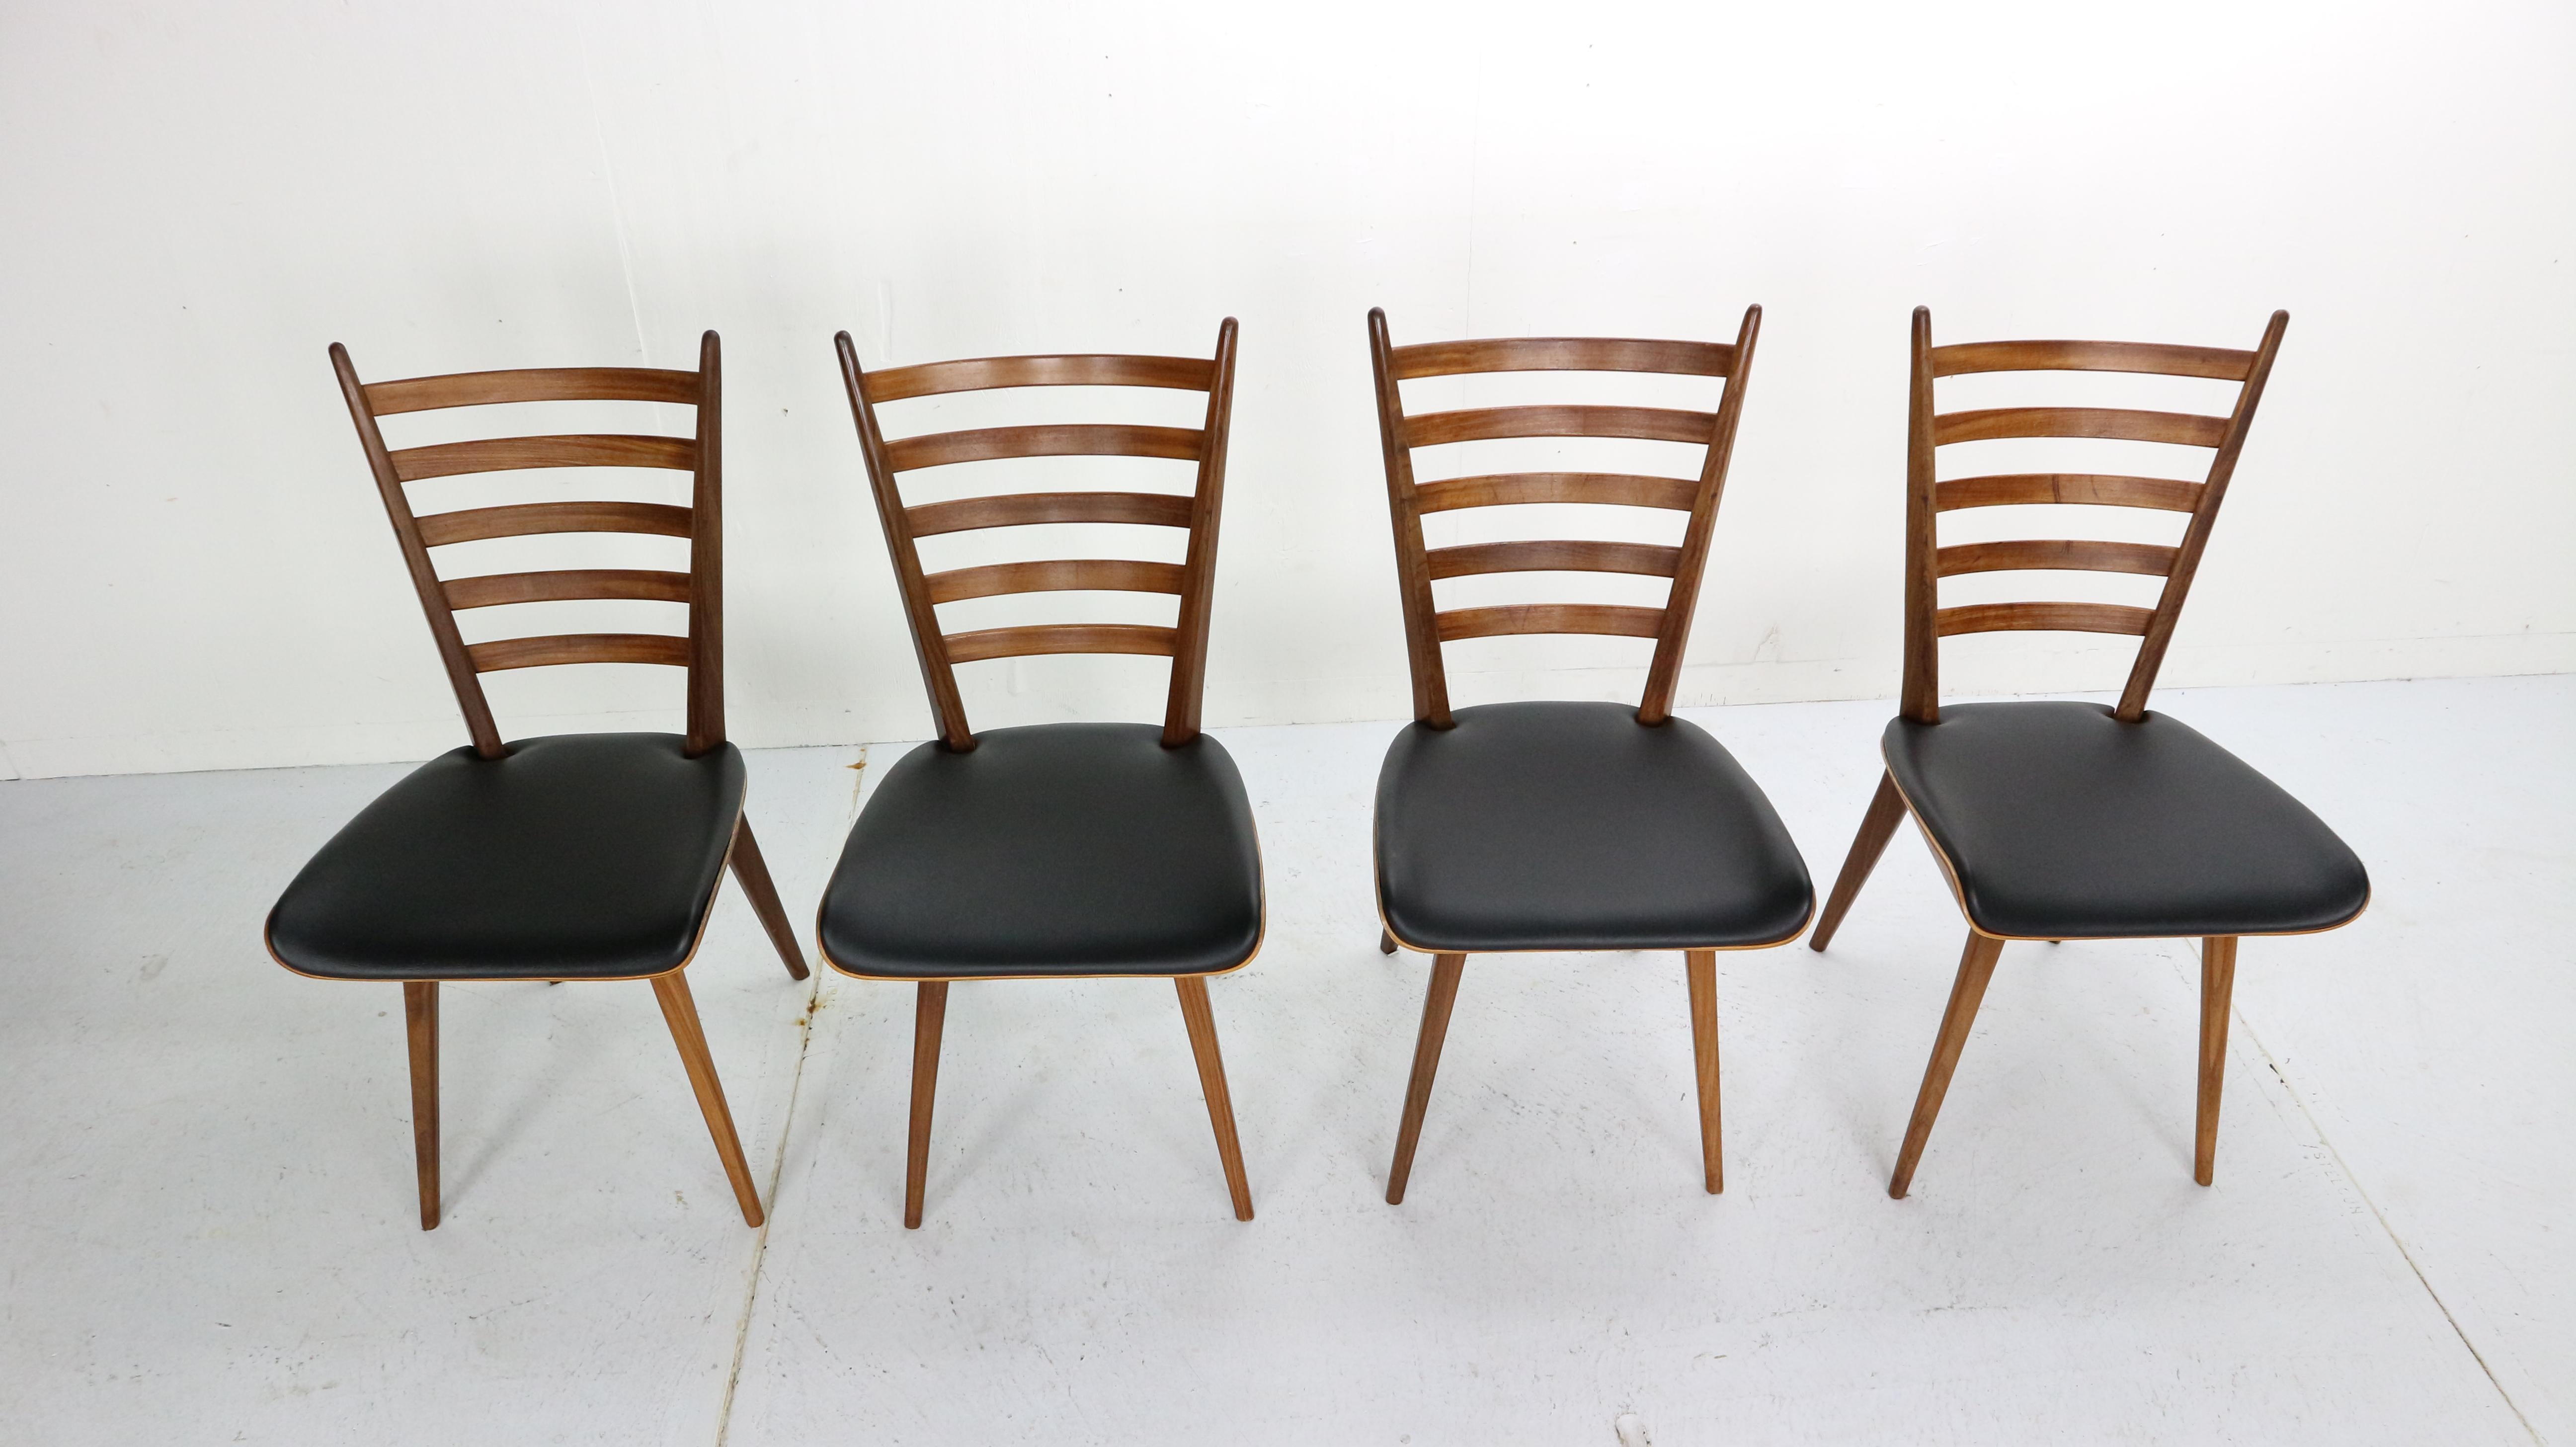 Mid-20th Century Set of 4 Dinning Room Chairs by Cees Braakman for Pastoe, 1960s Netherlands